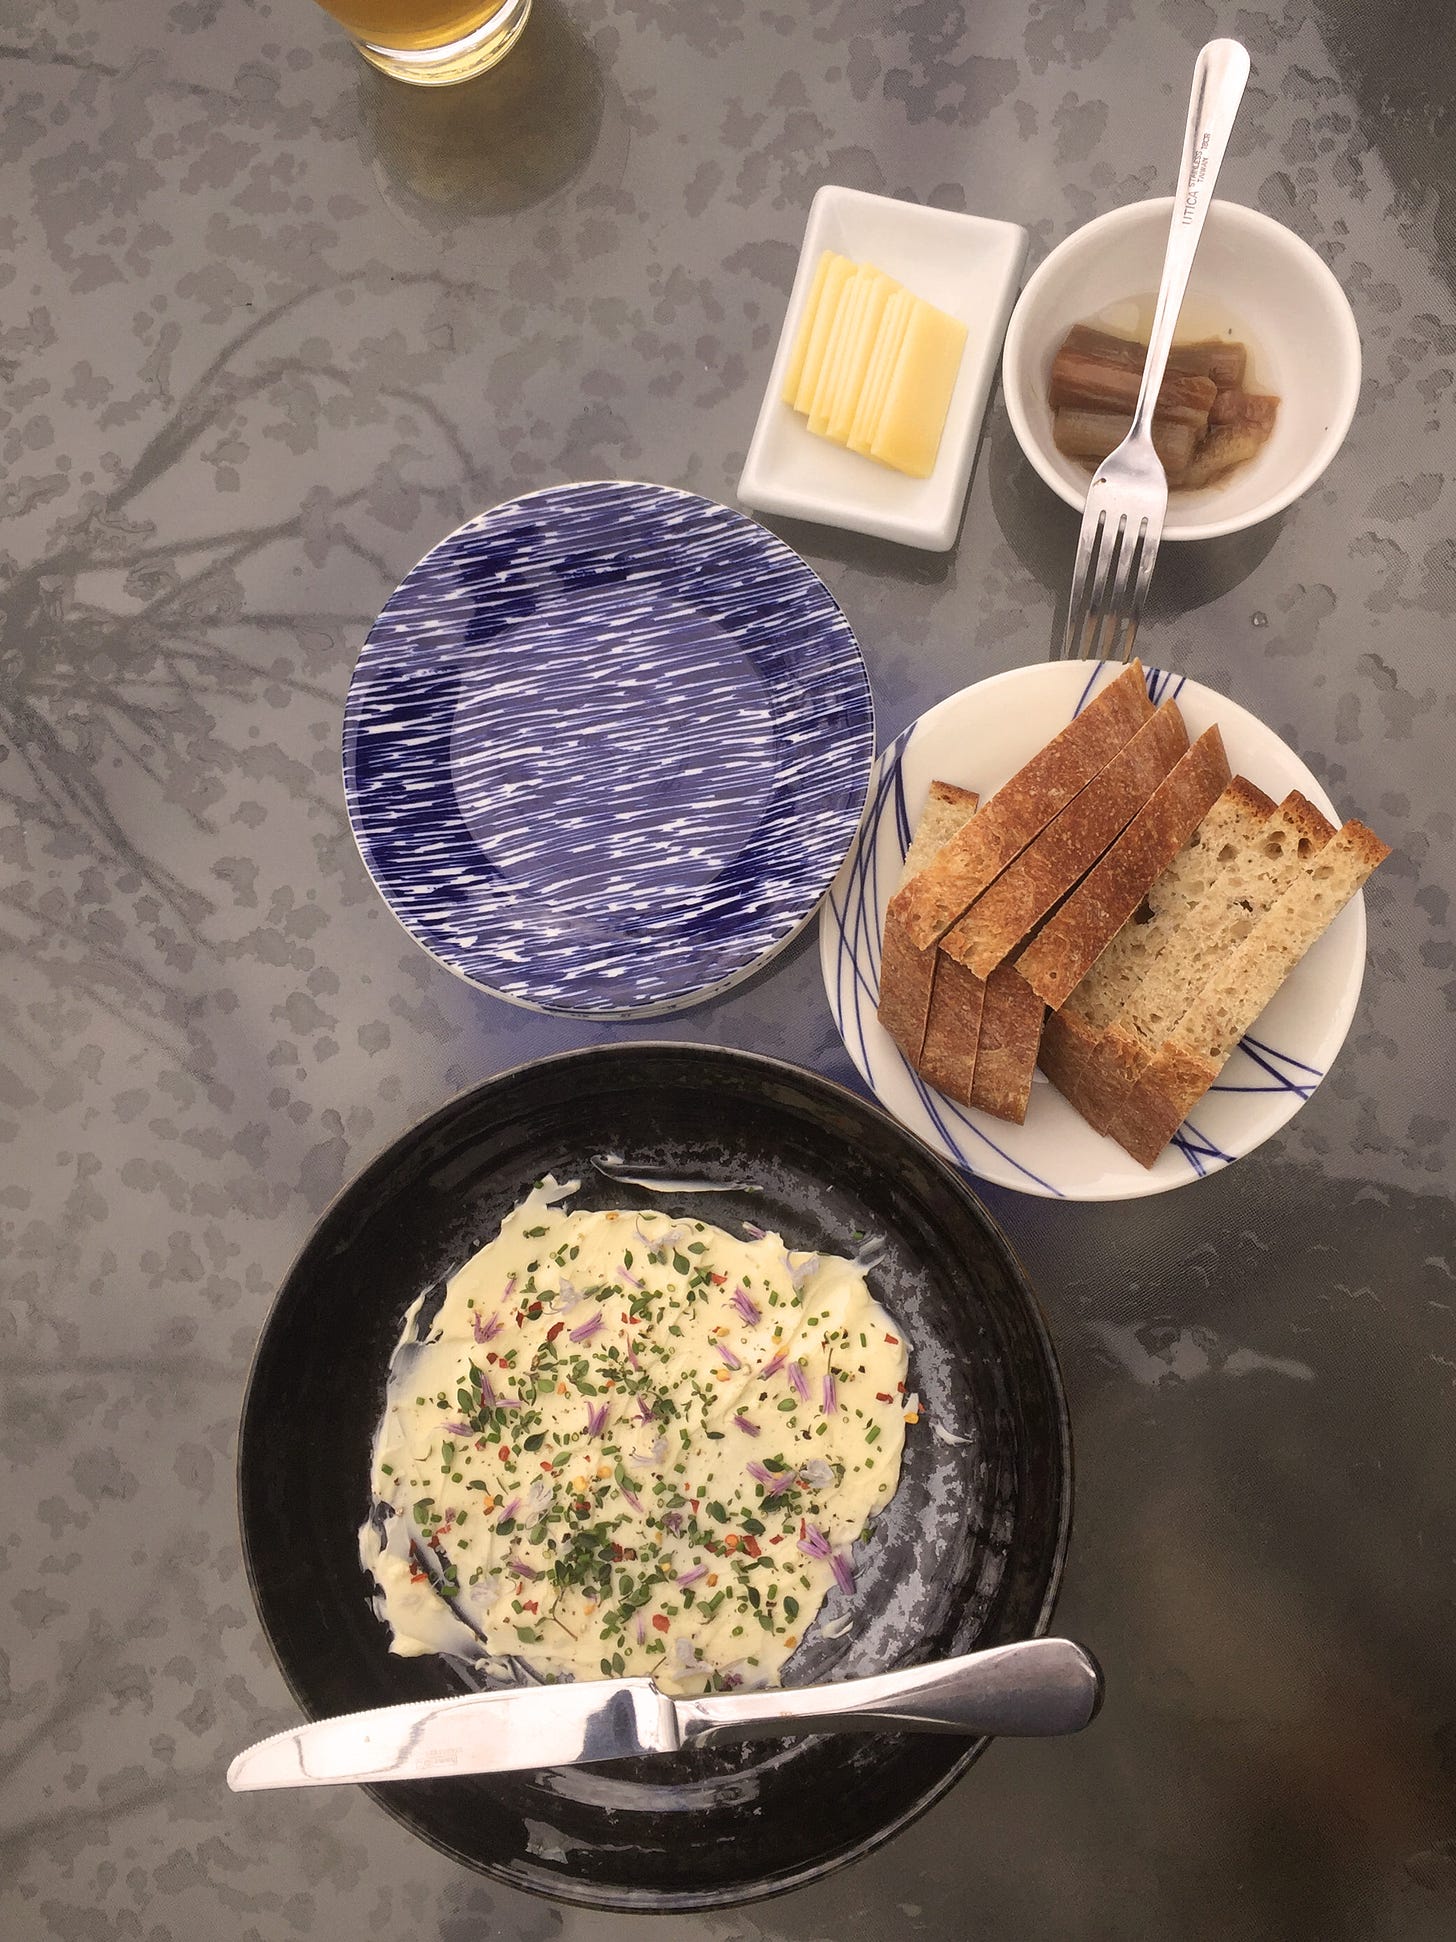 A glass patio tabletop with an arrangement of small dishes of pickles, cheese, slices of bread, and a black shallow bowl spread with butter and dusted with green herbs and small purple blossoms. 